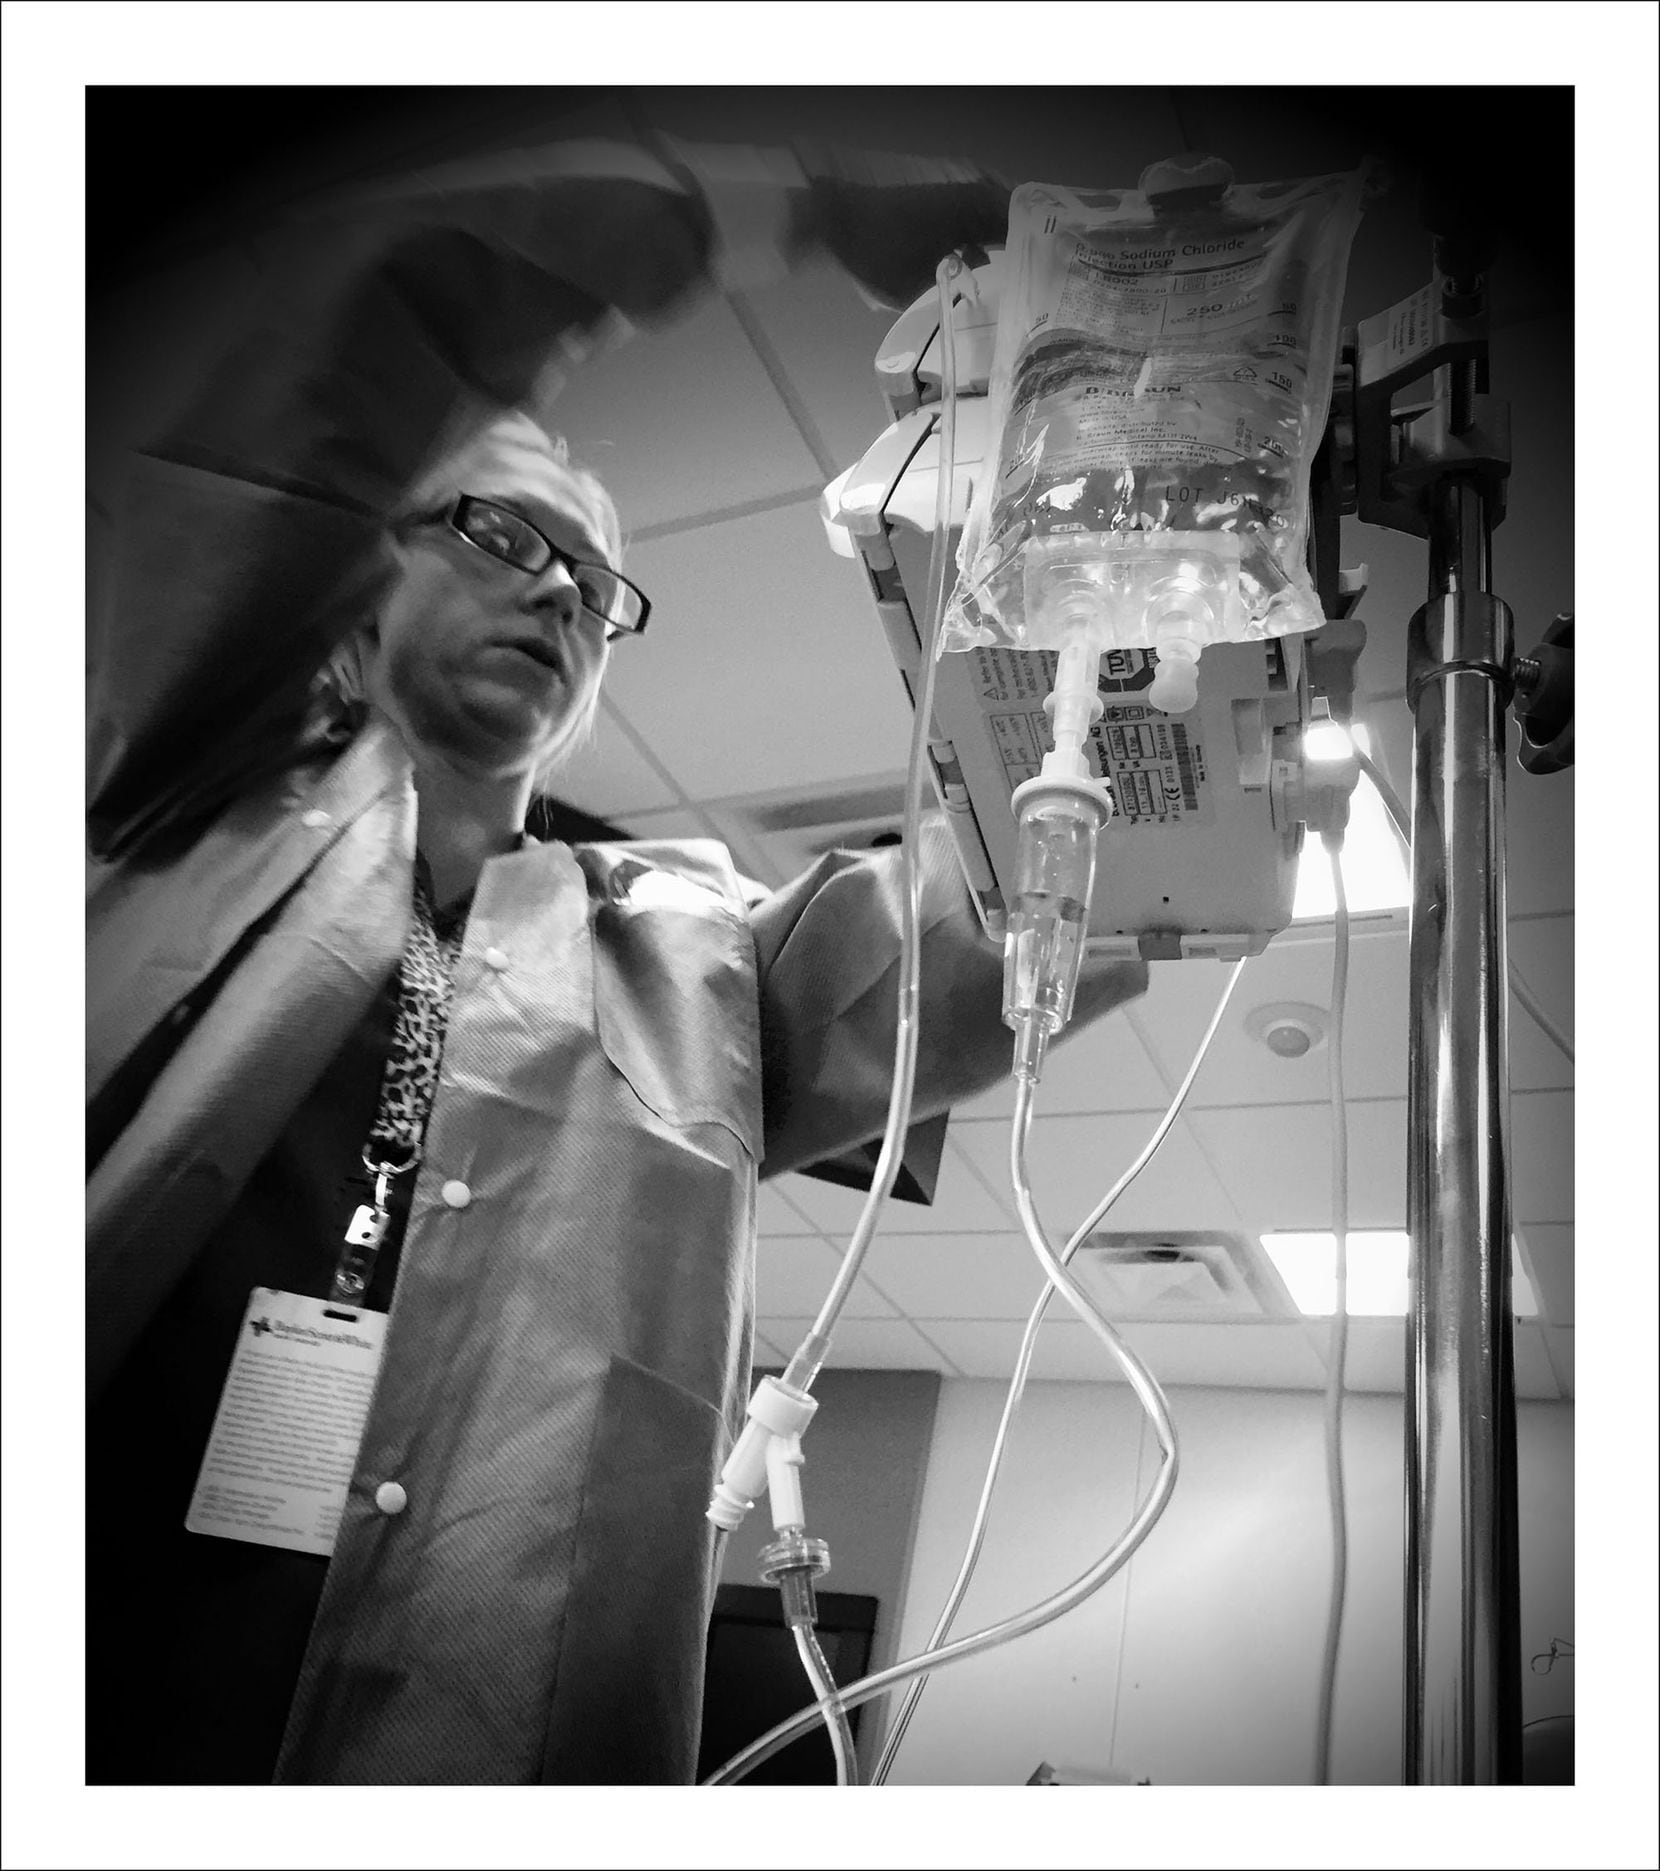 9/22/16 — Getting hooked up for the first day of chemotherapy.